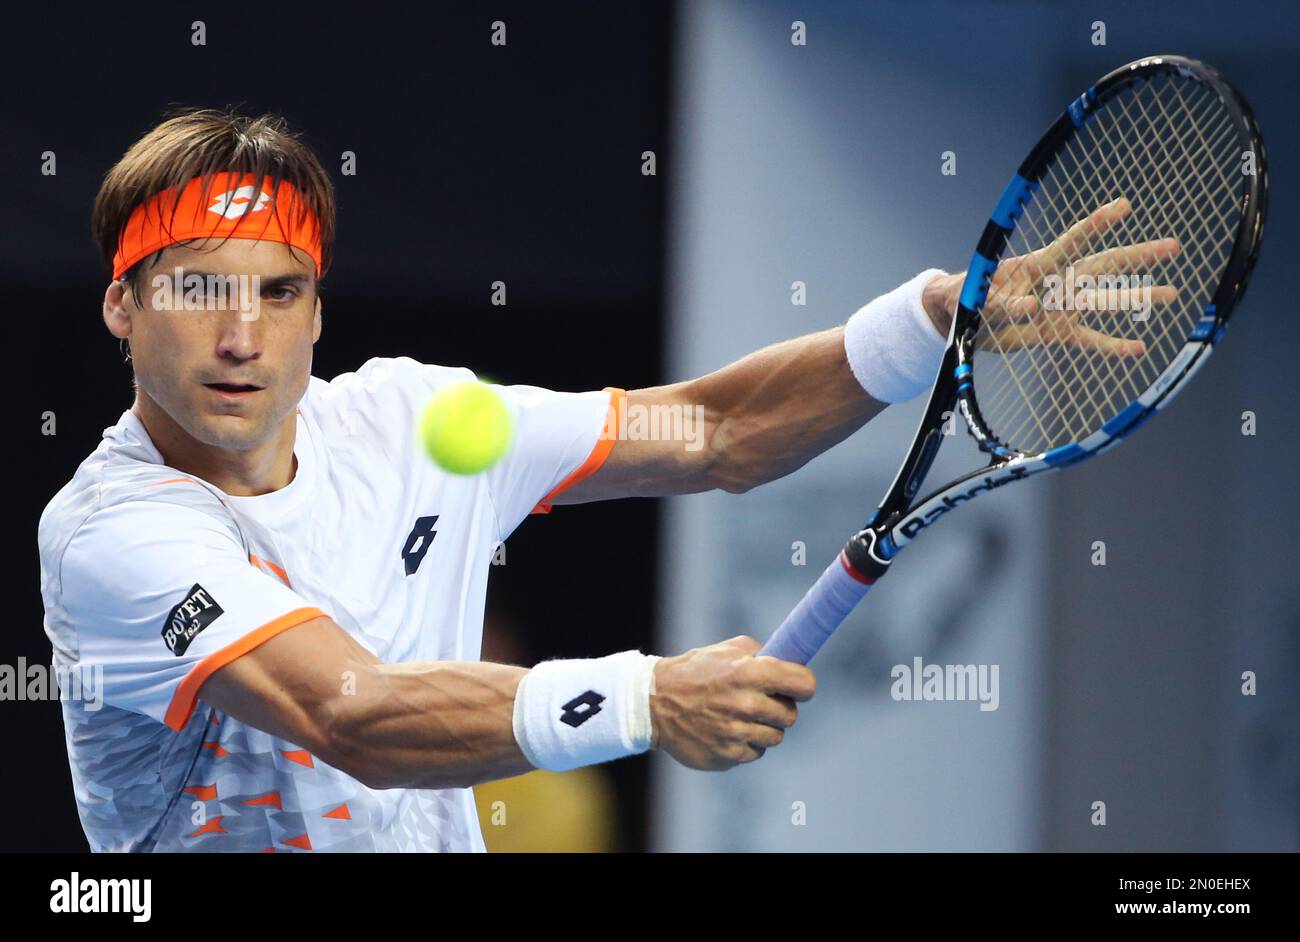 David Ferrer of Spain hits a backhand return to John Isner of the United  Statesduring their fourth round match at the Australian Open tennis  championships in Melbourne, Australia, Monday, Jan. 25, 2016.(AP